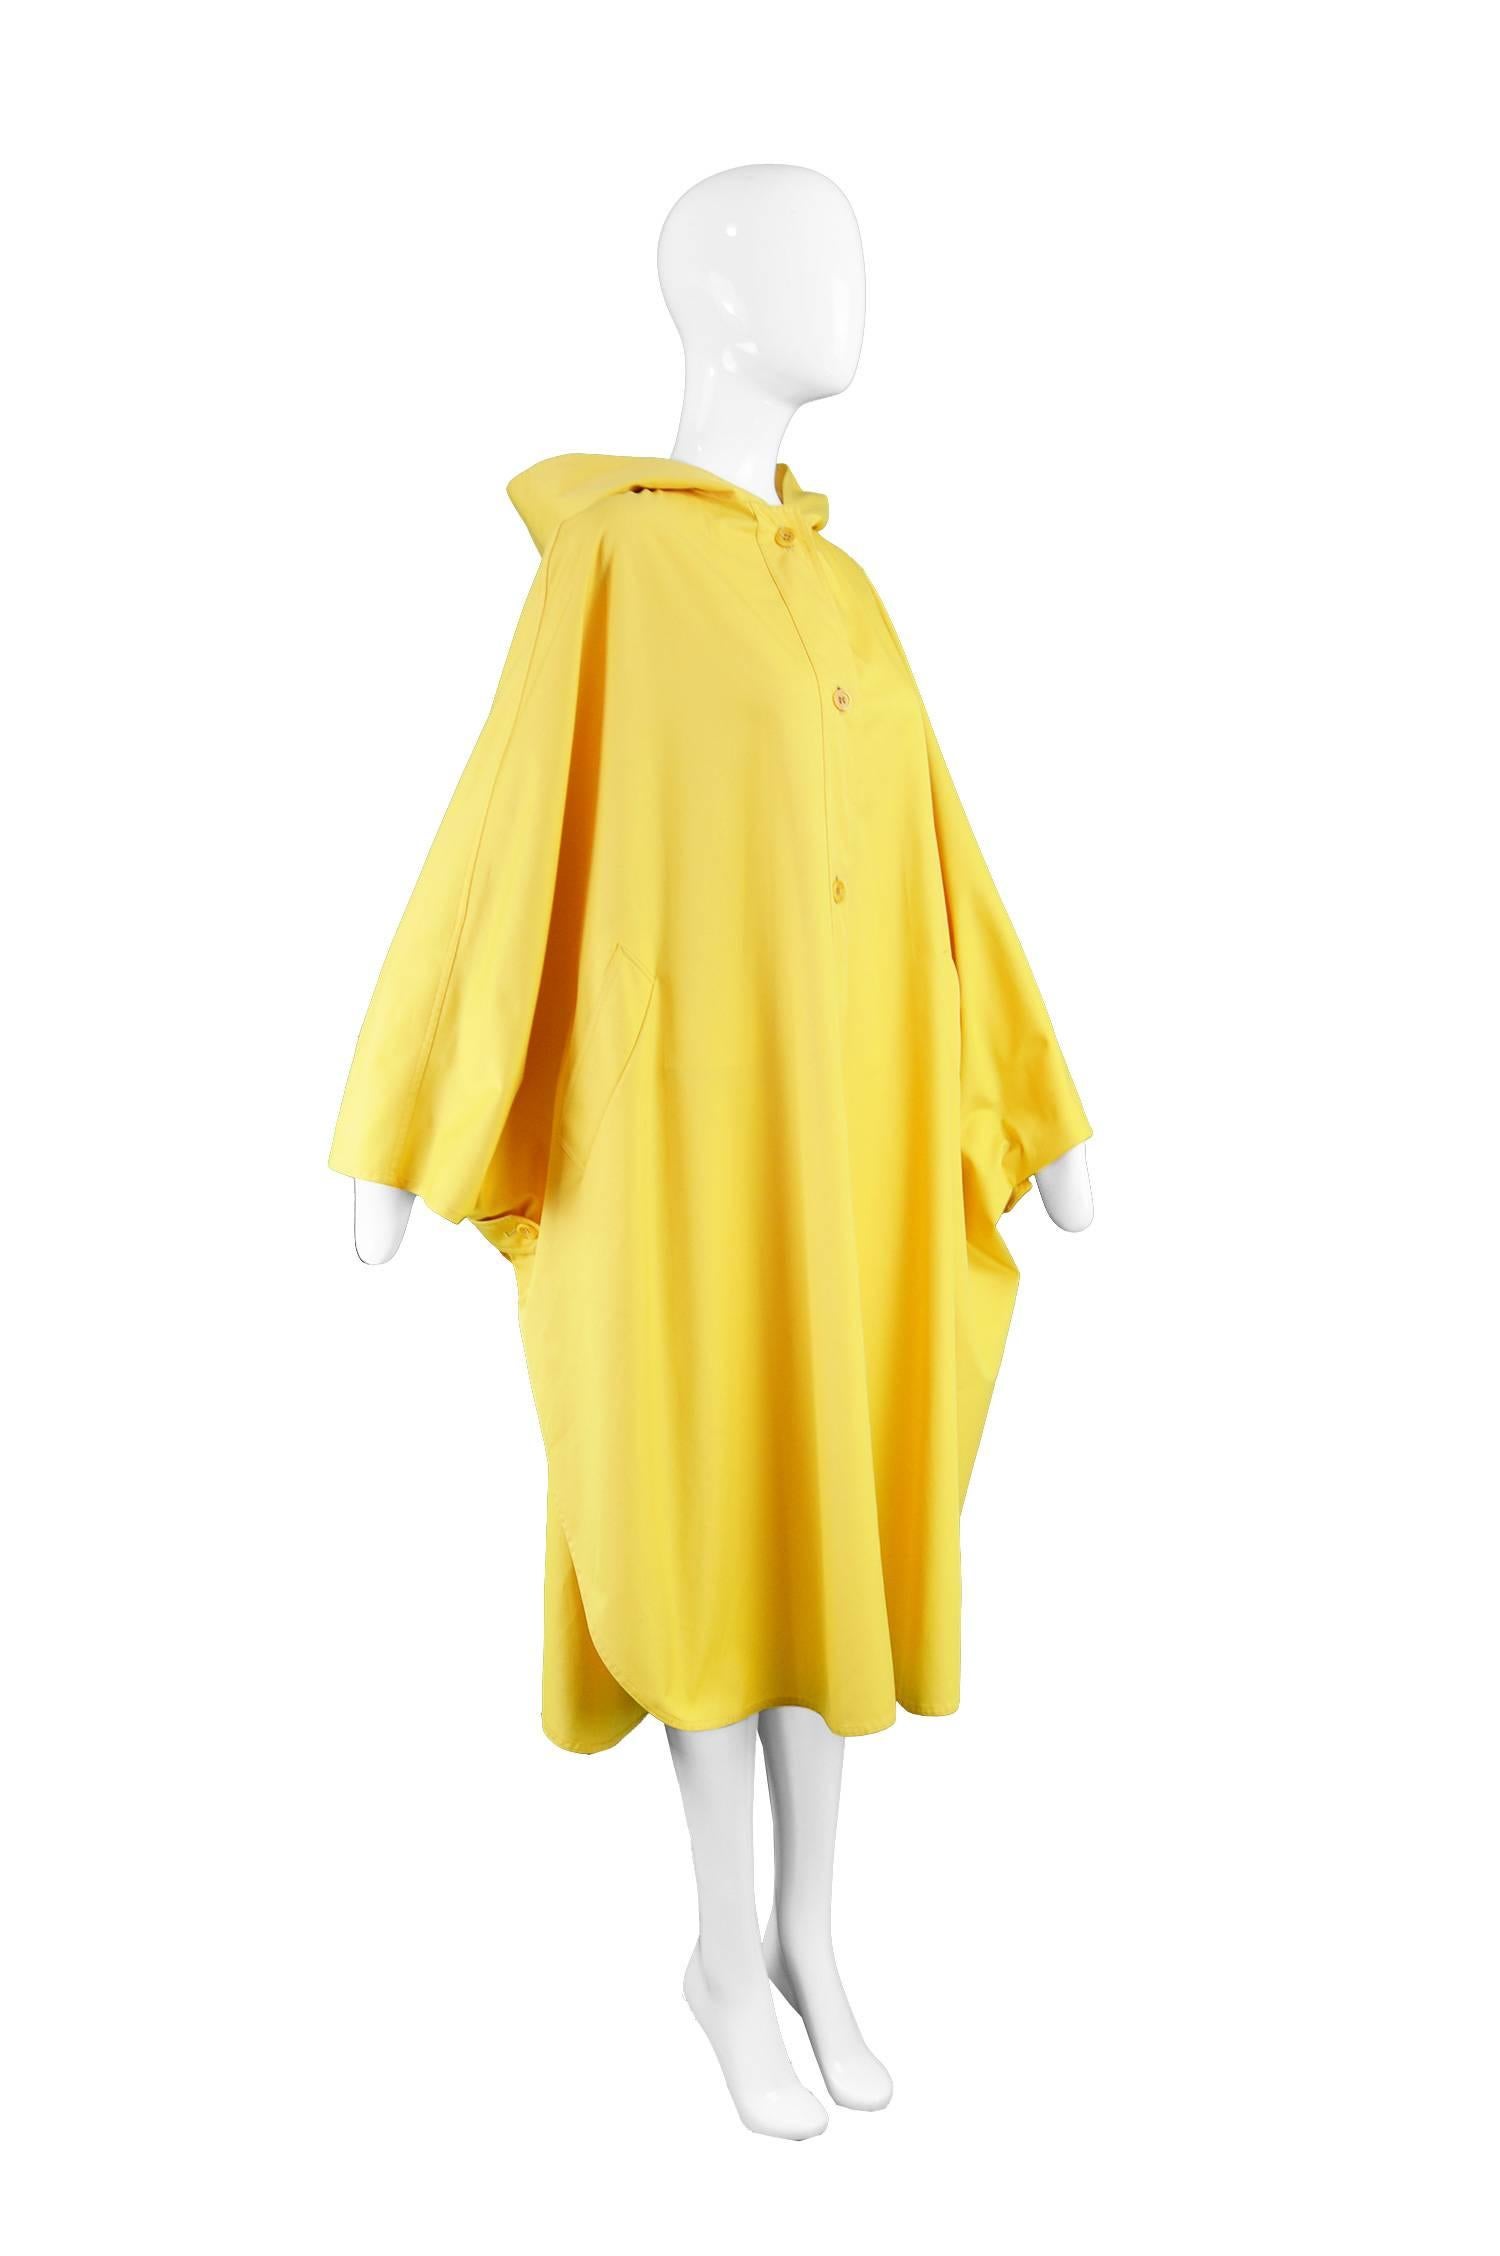 Women's or Men's Aquascutum Vintage Mustard Yellow Hooded Trench Cape Coat, 1980s 